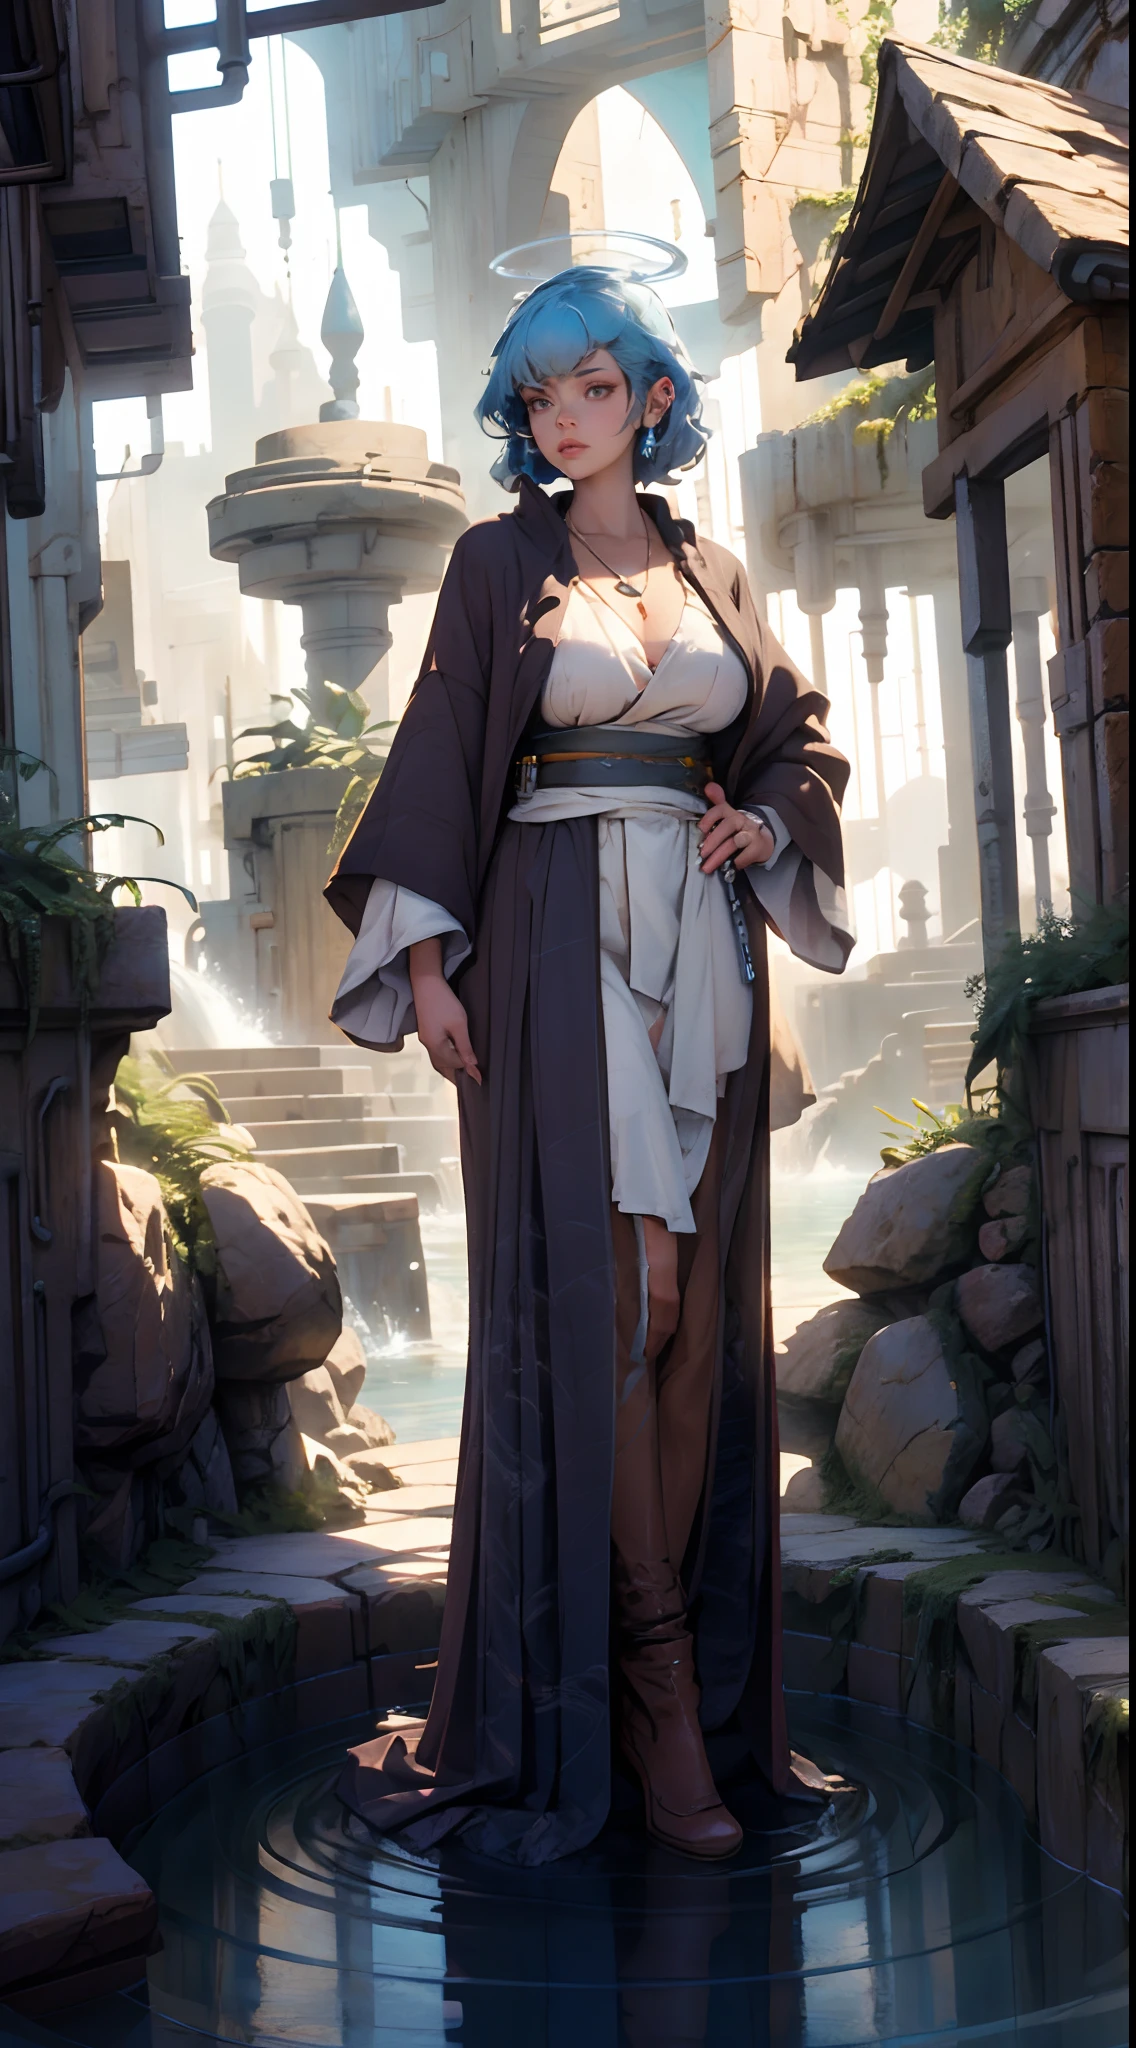 Jedi, tight robes, legs, alien, curvy, serious, (best quality)+, masterpiece+Blue hair length to the middle of the back, with a necklace and a blue and white dress, a halo of water above the head, scales visible on the body and face, nsfw